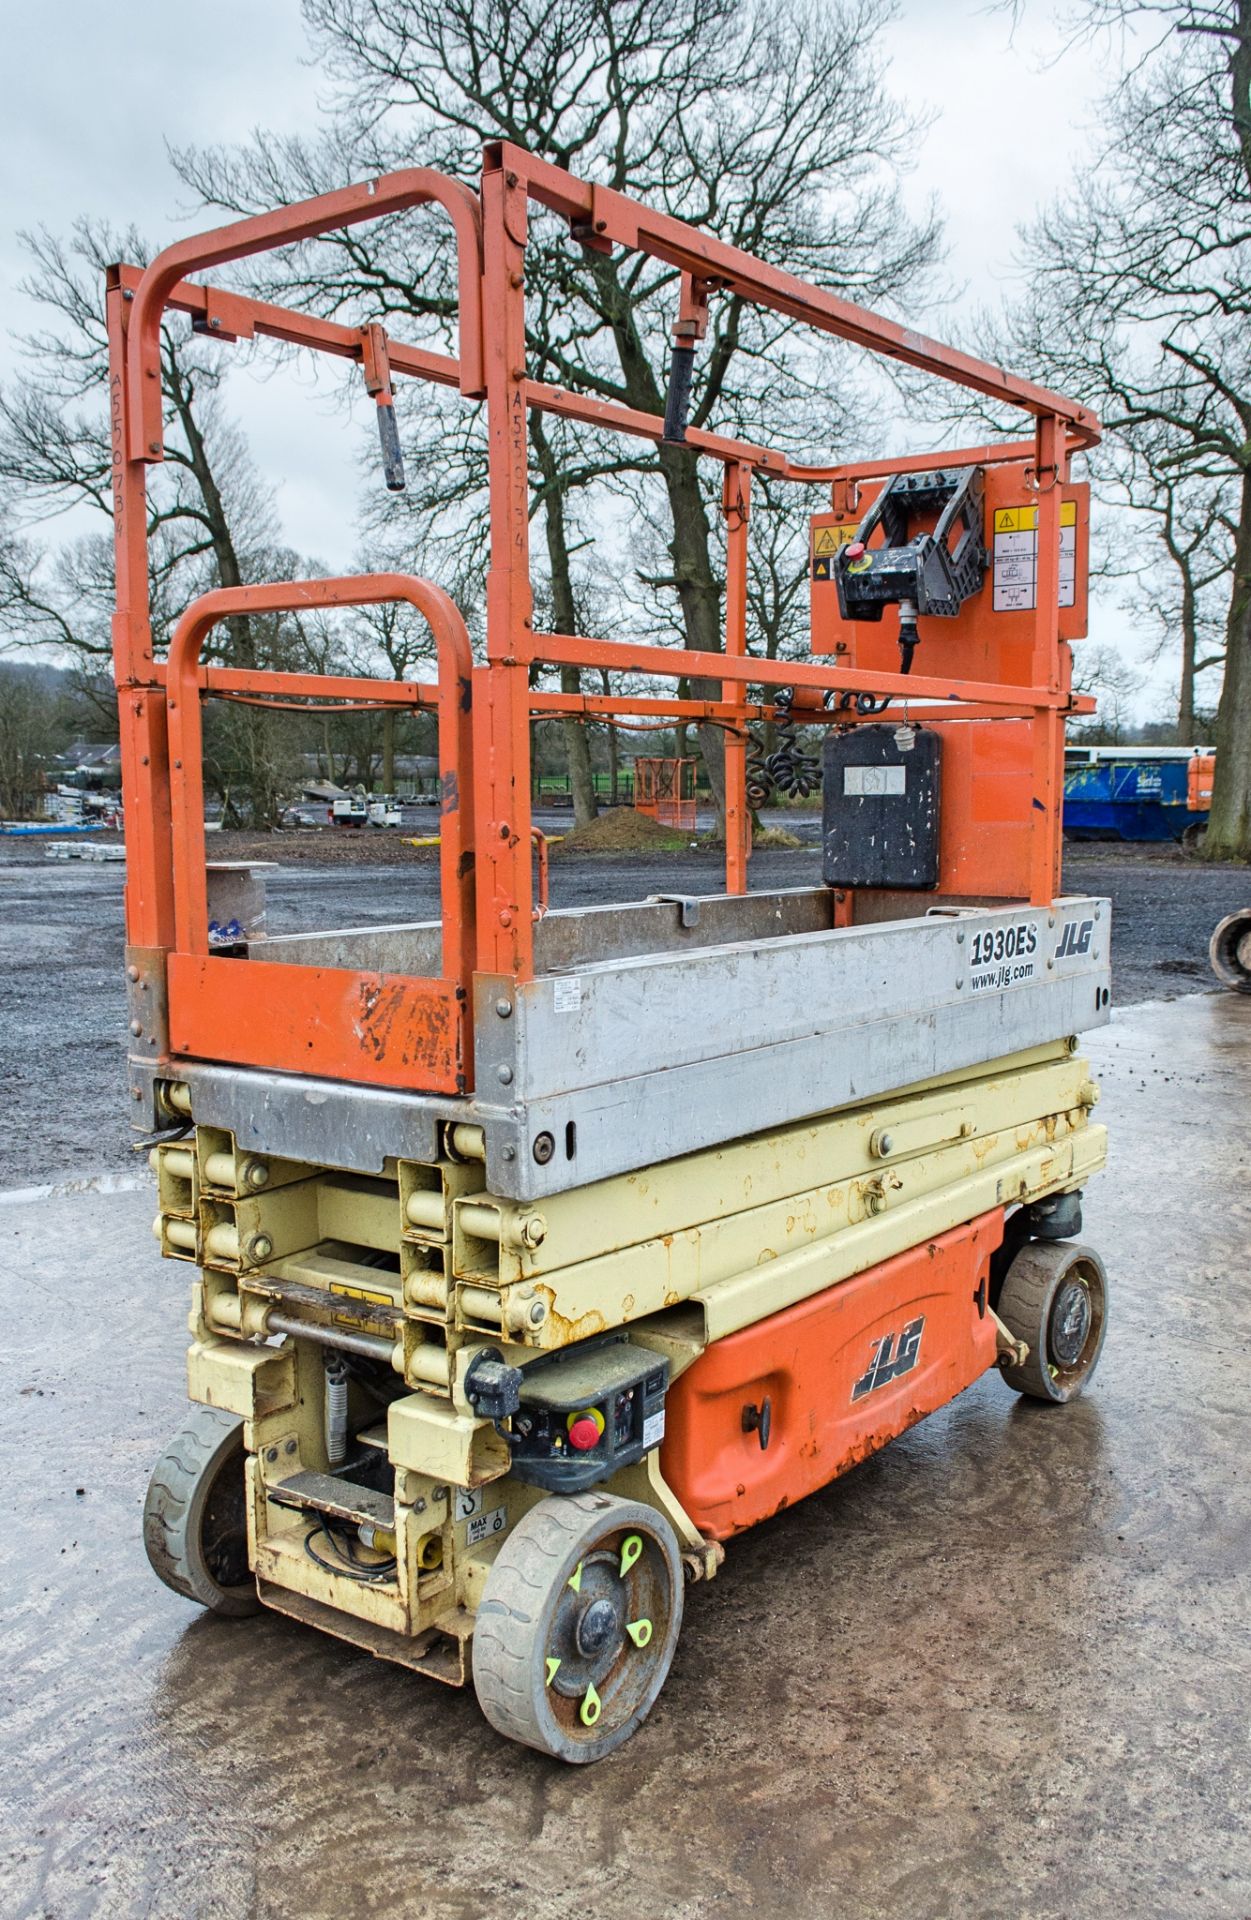 JLG 1930ES battery electric scissor lift Year: 2010 S/N: 24097 Recorded Hours: 254 A550734